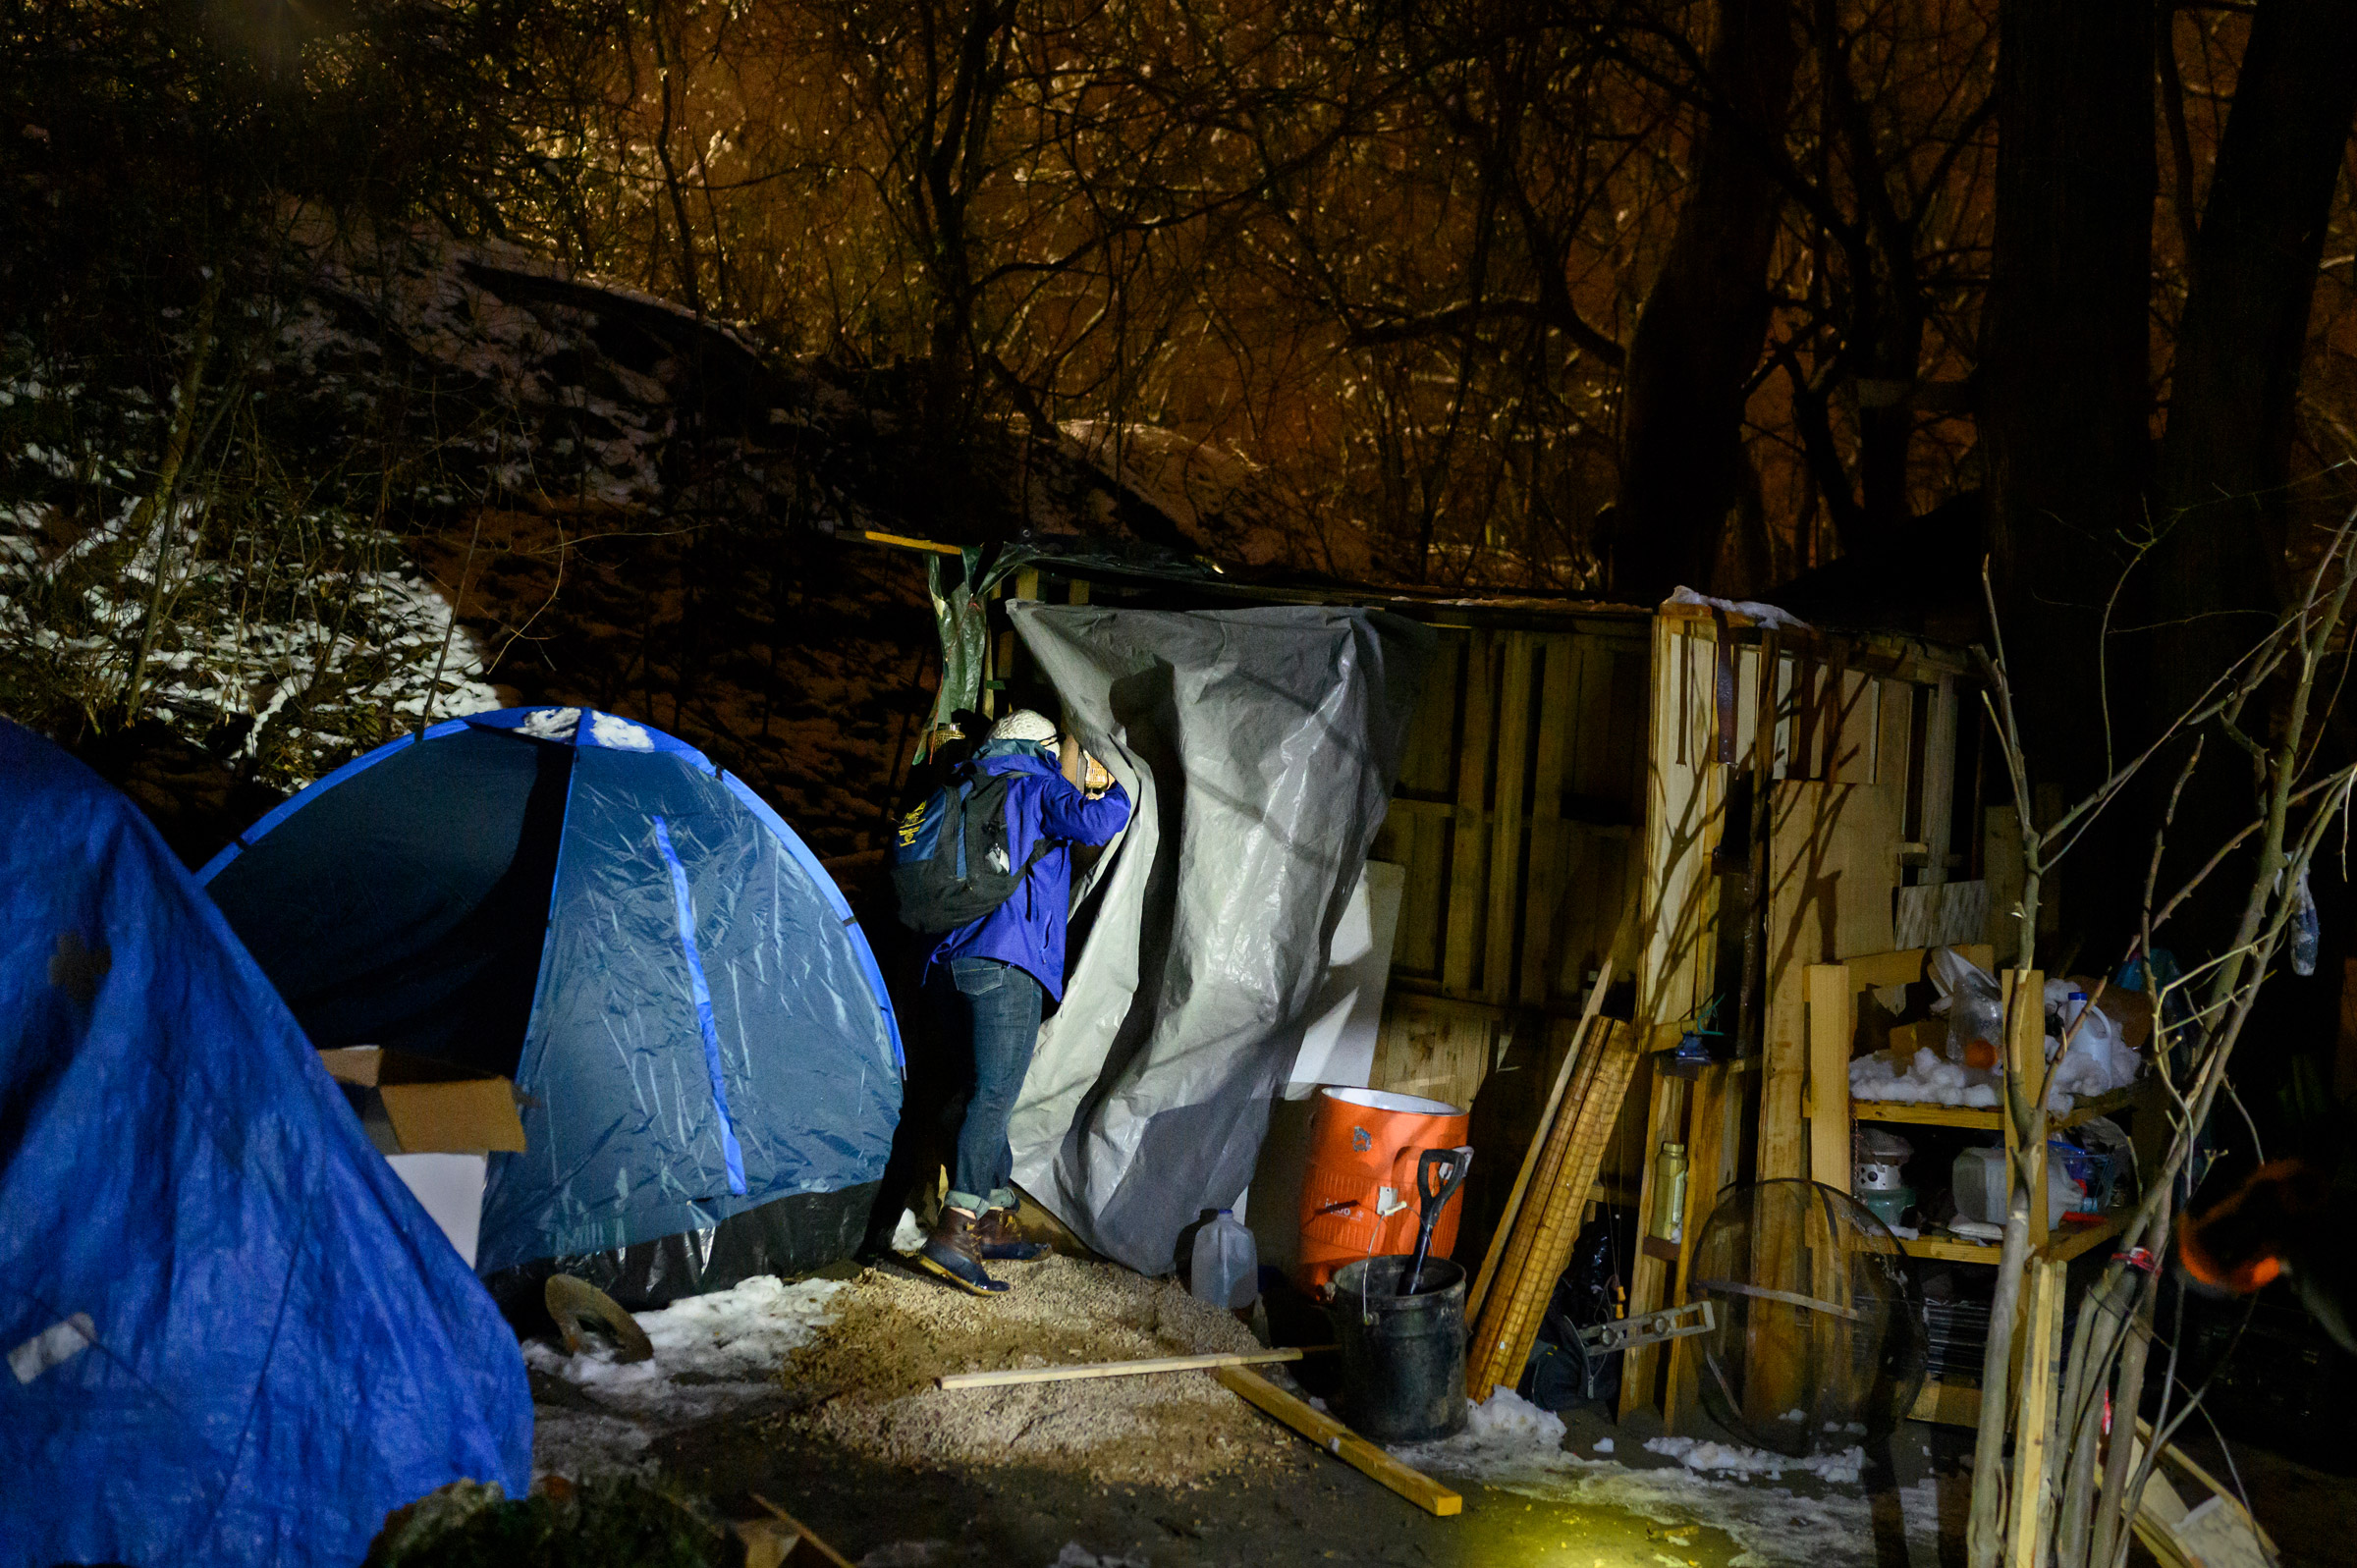 Nurse Crystal Bauer checks on a resident at a homeless encampment on Dec 18. Bauer helped start Project Hope, a street-medicine program supported through community donations. (Rebecca Kiger)